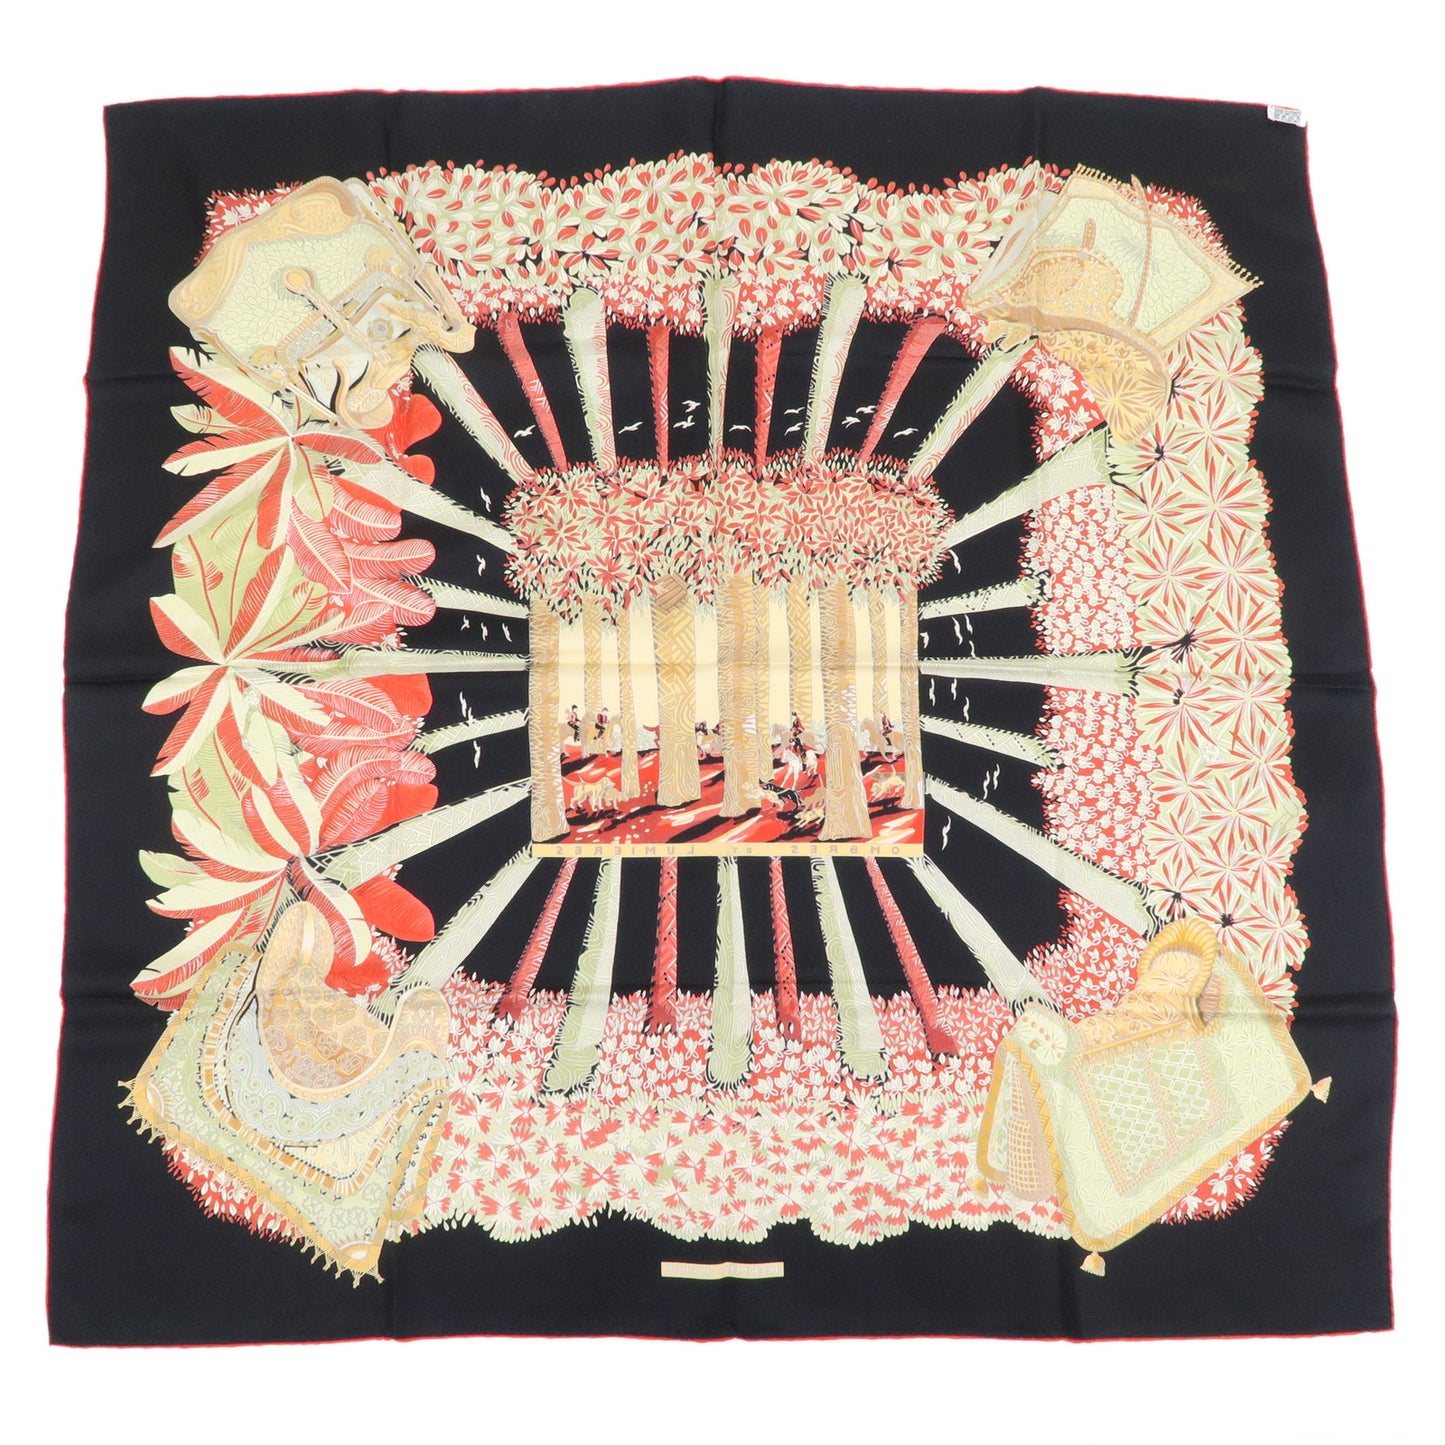 HERMES Carre 90 Scarf Silk 100% Ombres et Lumieres Shadow & Light